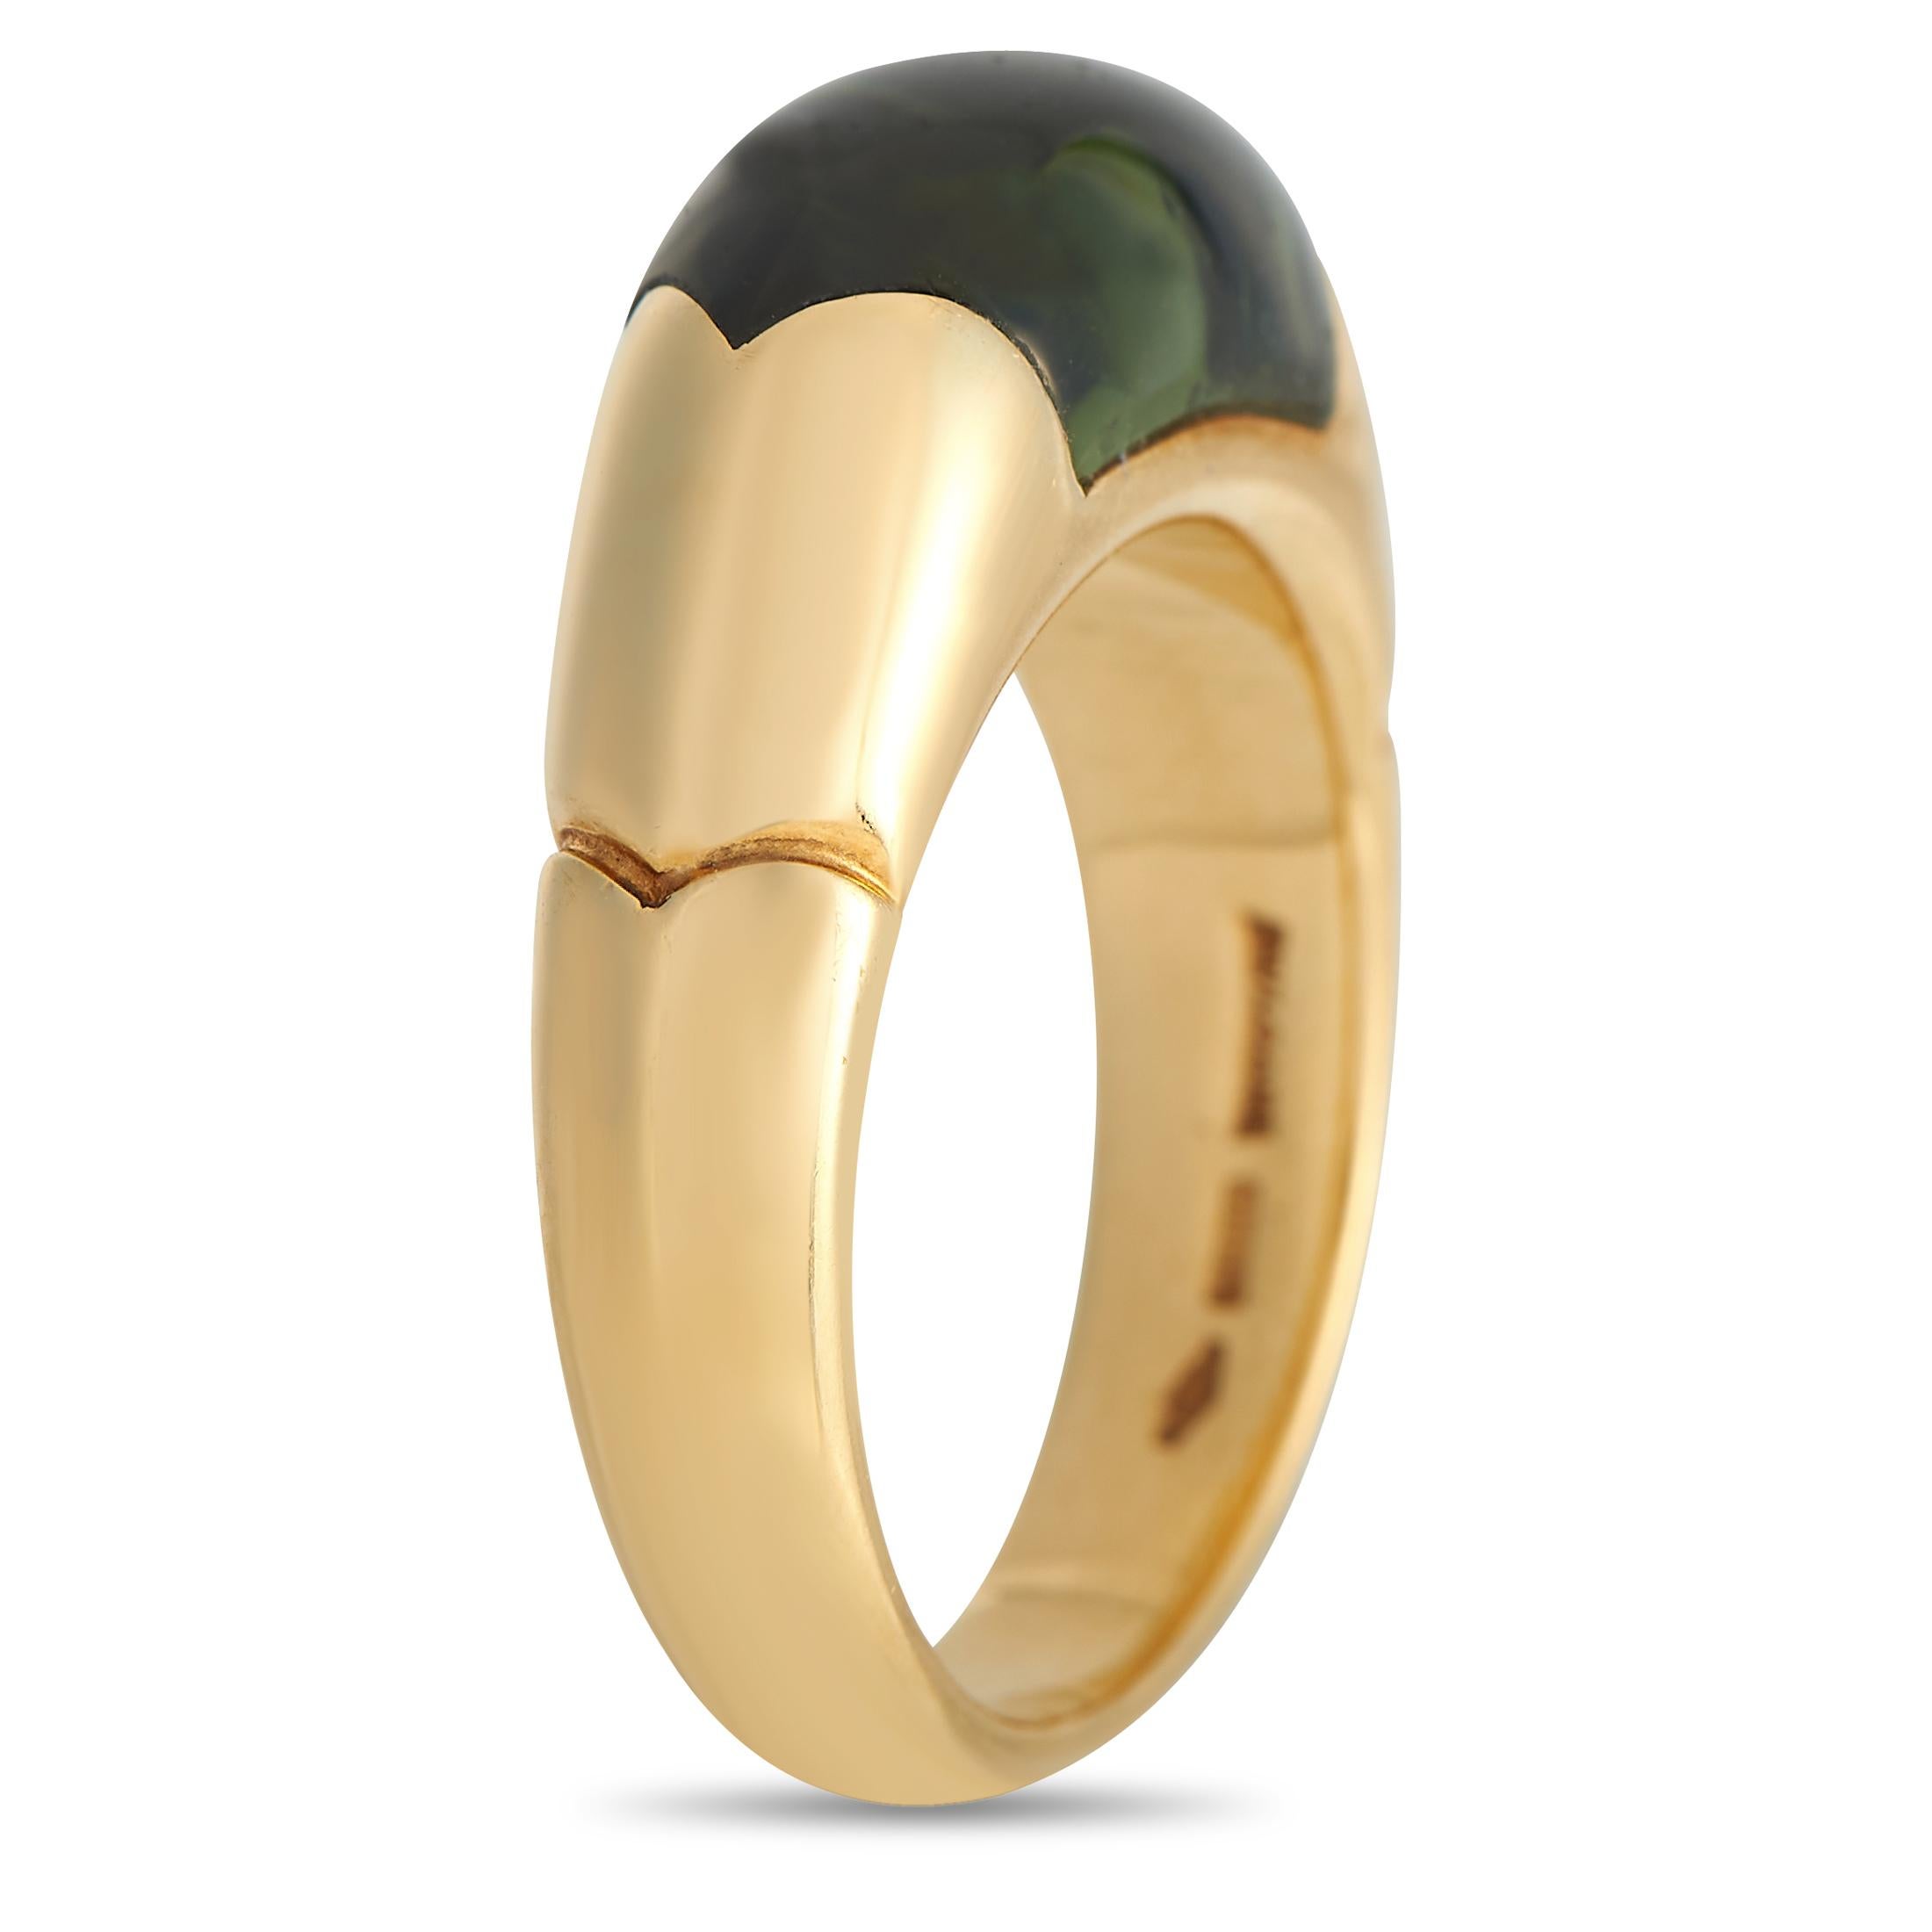 A luxe yet understated accessory perfect for polishing your daily wear and work wardrobe. This ring from Bvlgari's discontinued Tronchetto Collection features a domed shank that tapers towards the back. The band is crafted from 18K solid gold and